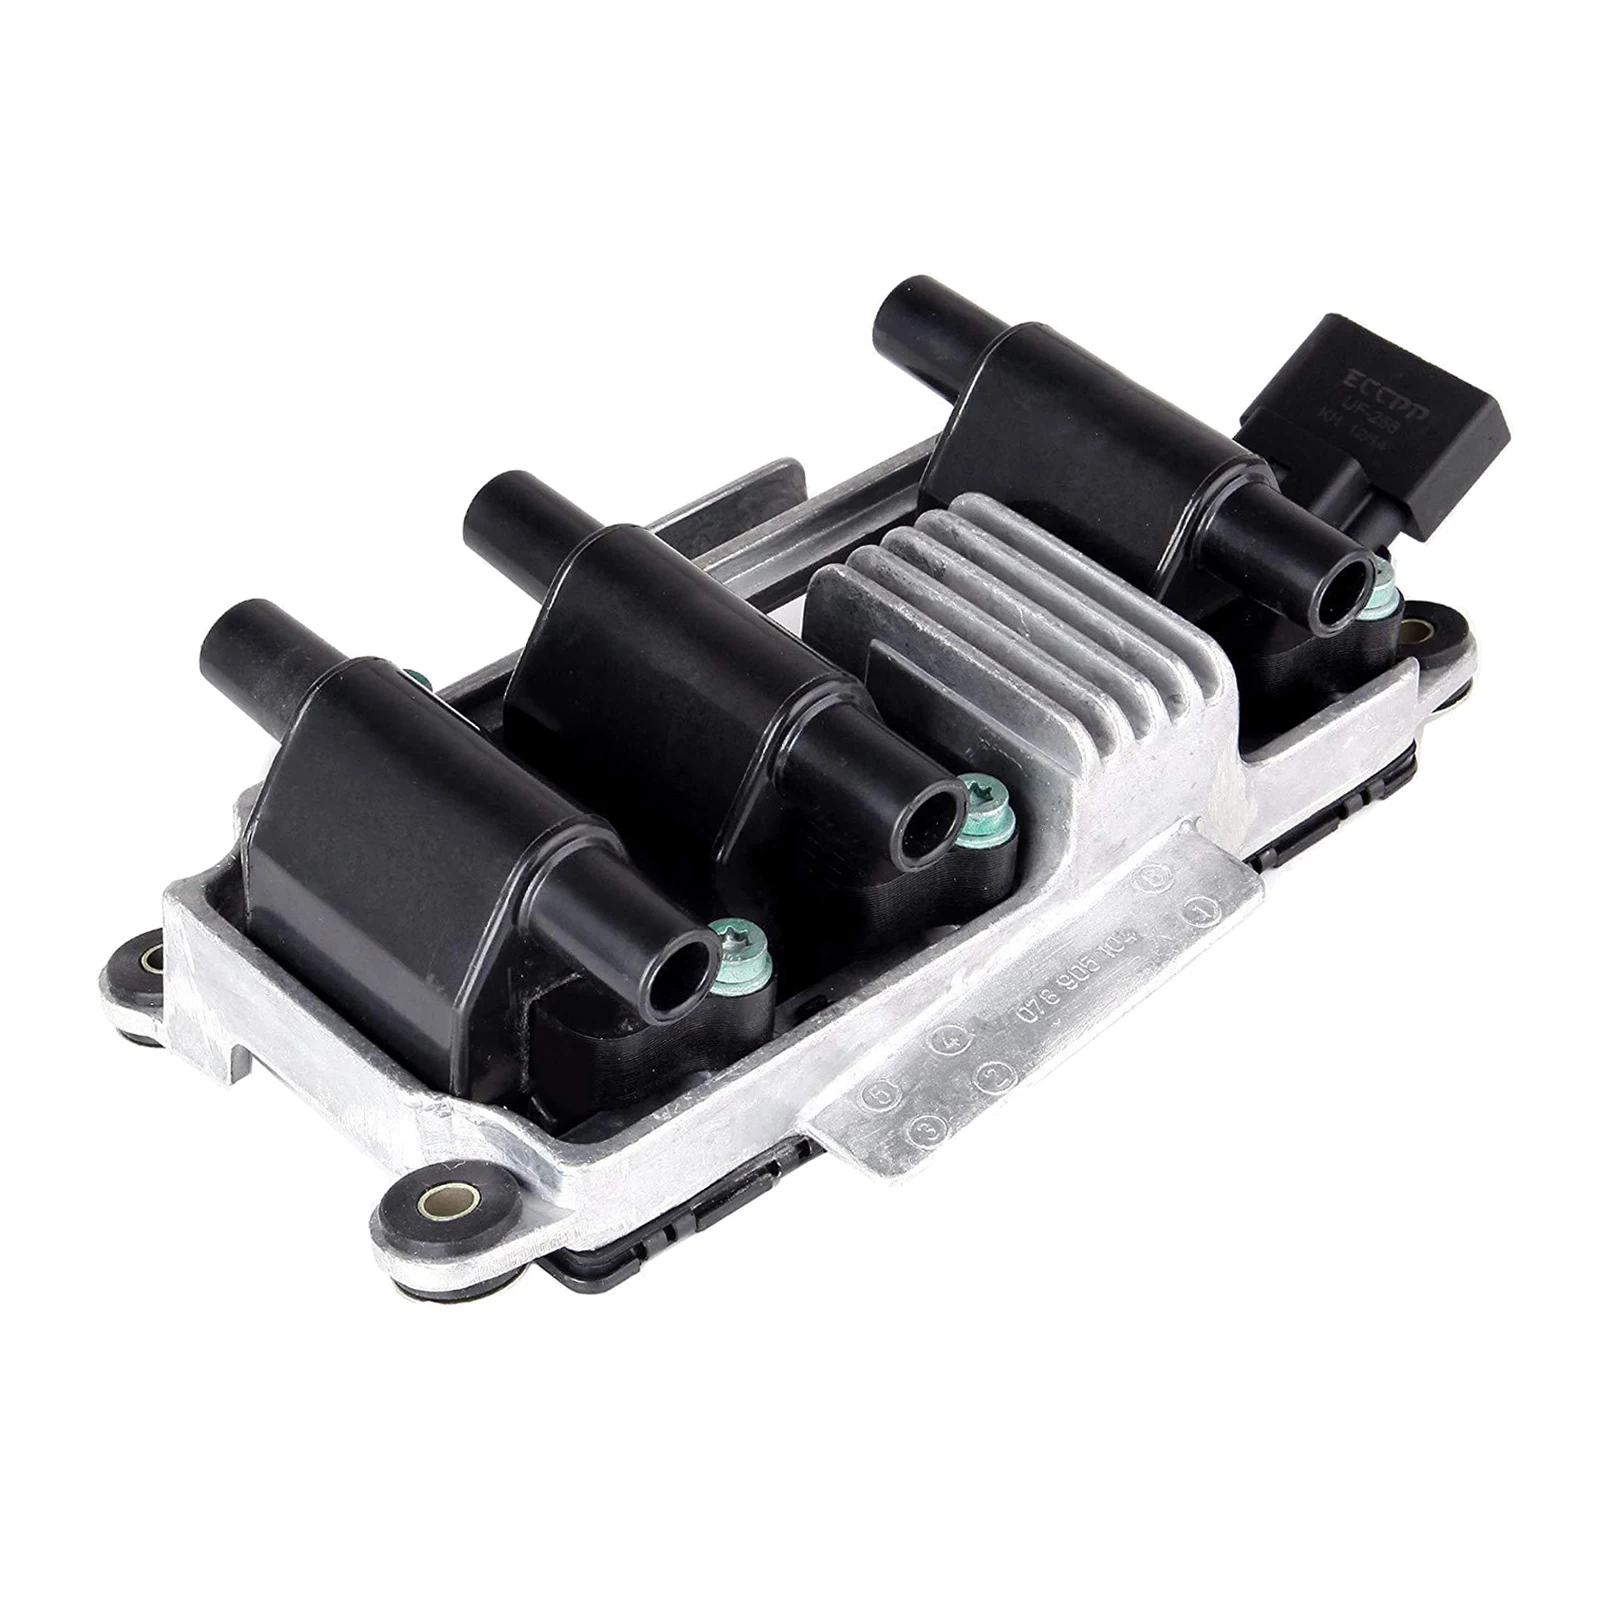 Ignition Coil Pack Replacement Fits for Audi A4 A6 97-01 for VW Passat 98-05 Car Accessory 078905104